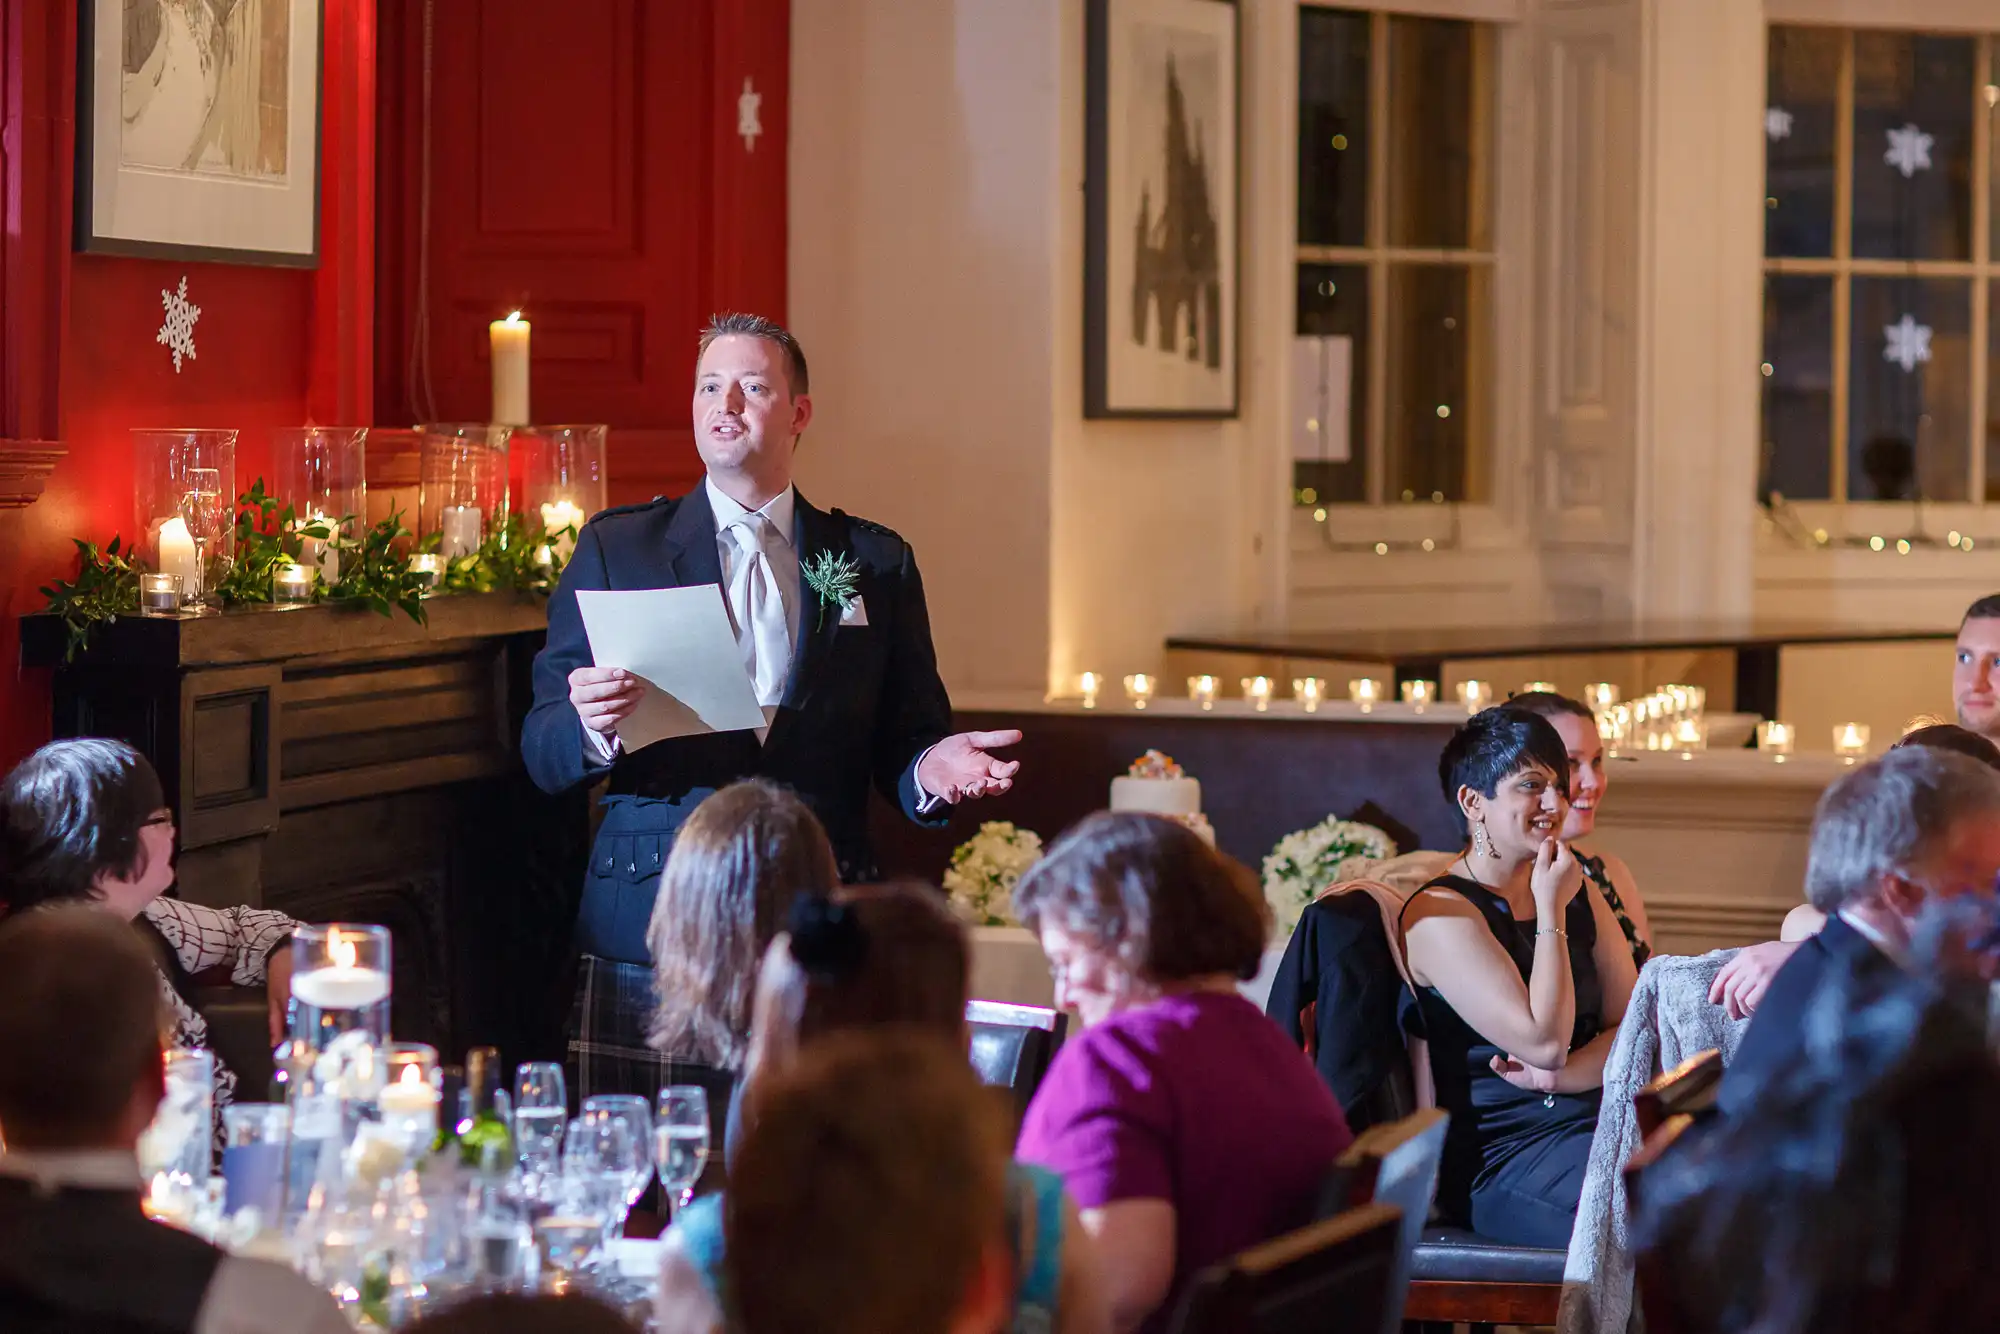 Man in suit giving a speech at a wedding reception, guests seated around tables listening, room decorated with candles and lights.